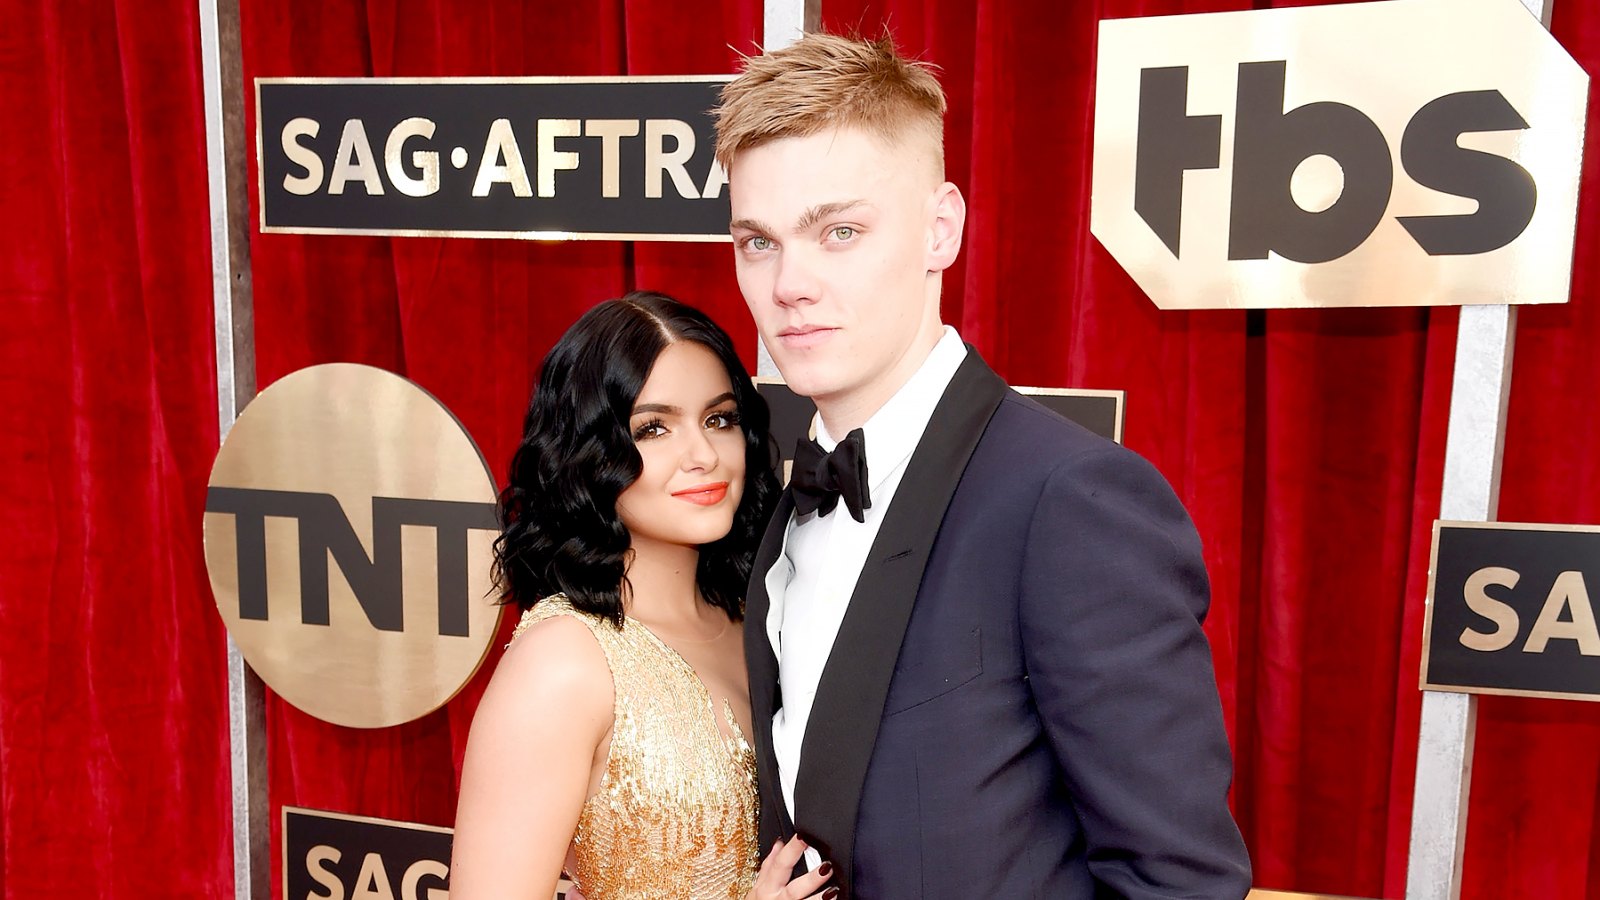 Ariel Winter and Levi Meaden attend The 23rd Annual Screen Actors Guild Awards at The Shrine Auditorium on January 29, 2017 in Los Angeles, California.